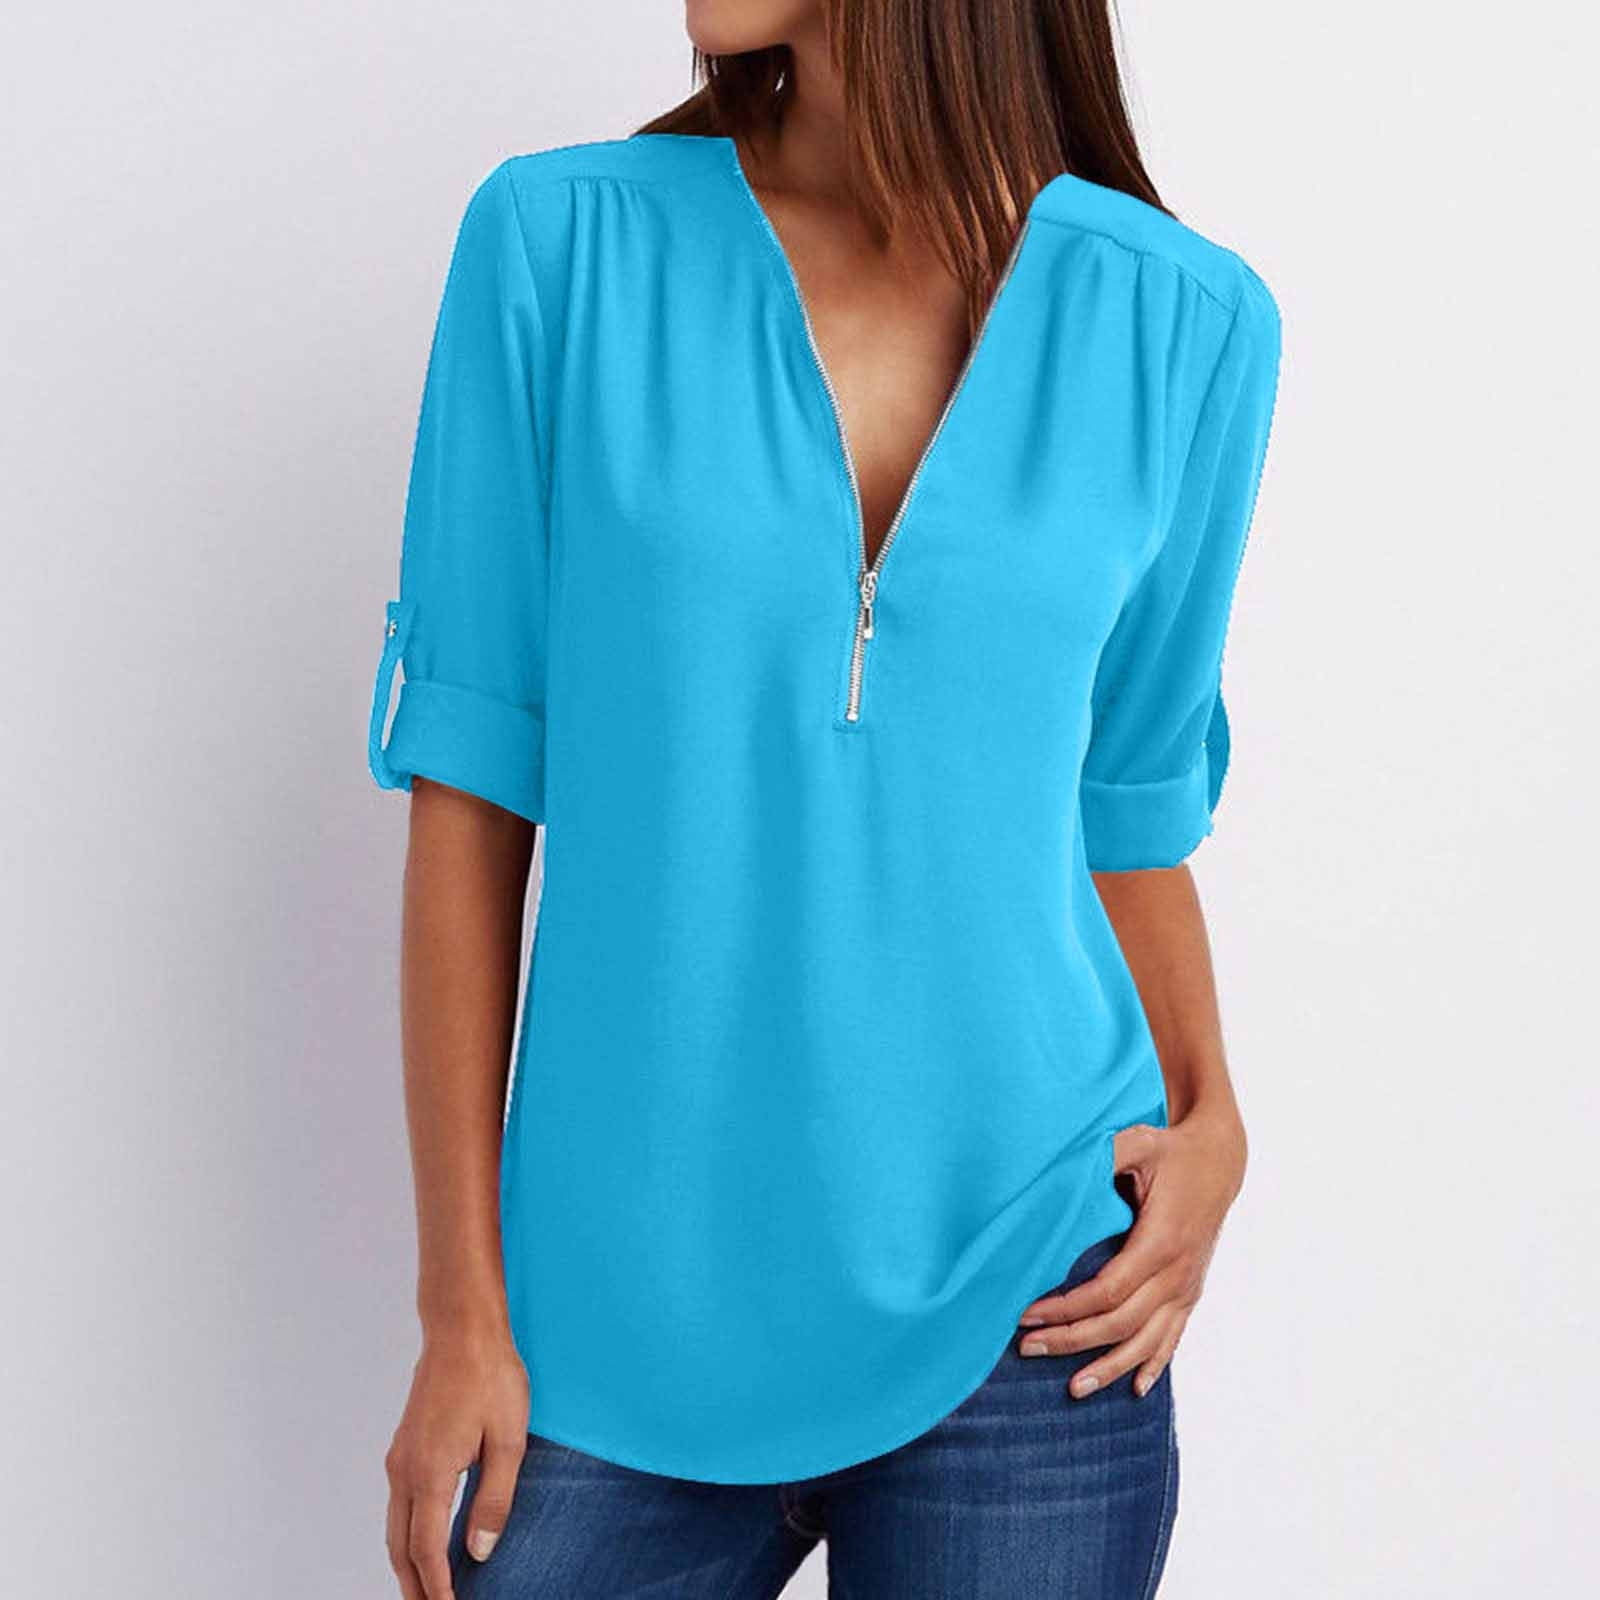 Teissuly Women's Summer Long Sleeve Zip Casual Tunic V-Neck Rollable ...